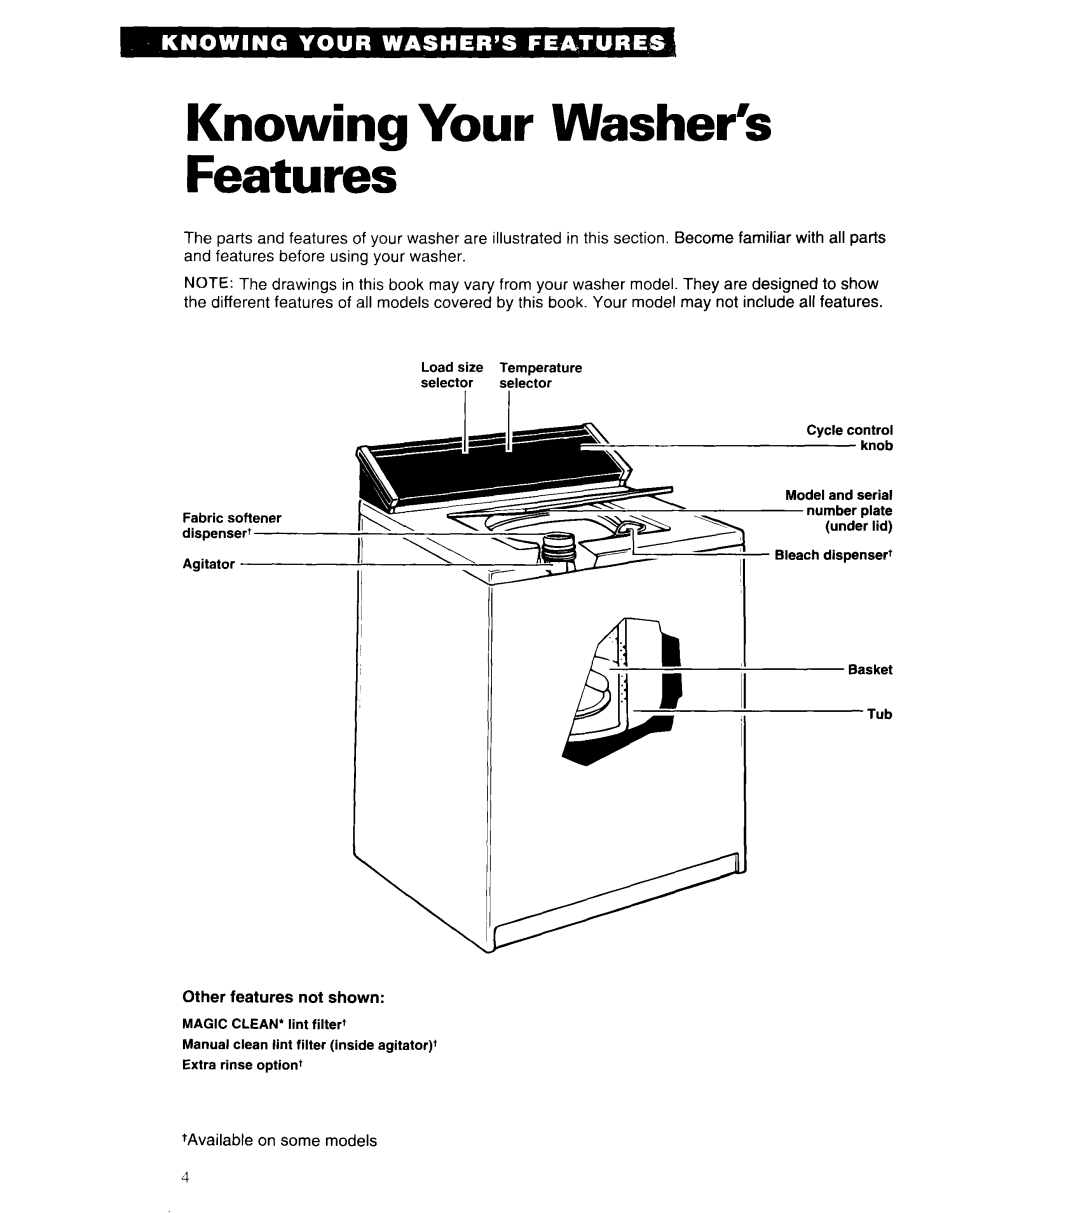 Whirlpool 3360461 warranty Knowing Your Washer’s Features 